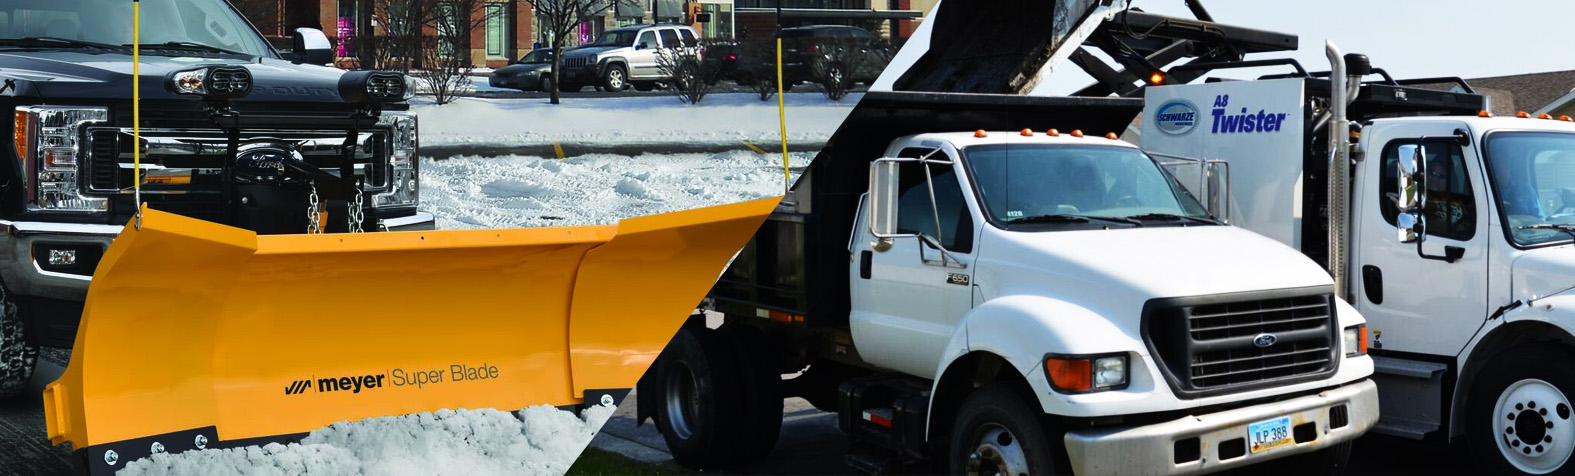 Street Sweepers Snow Plow Scrubbers Sweepers- Contractor Applications- Carolina Industrial Equipment